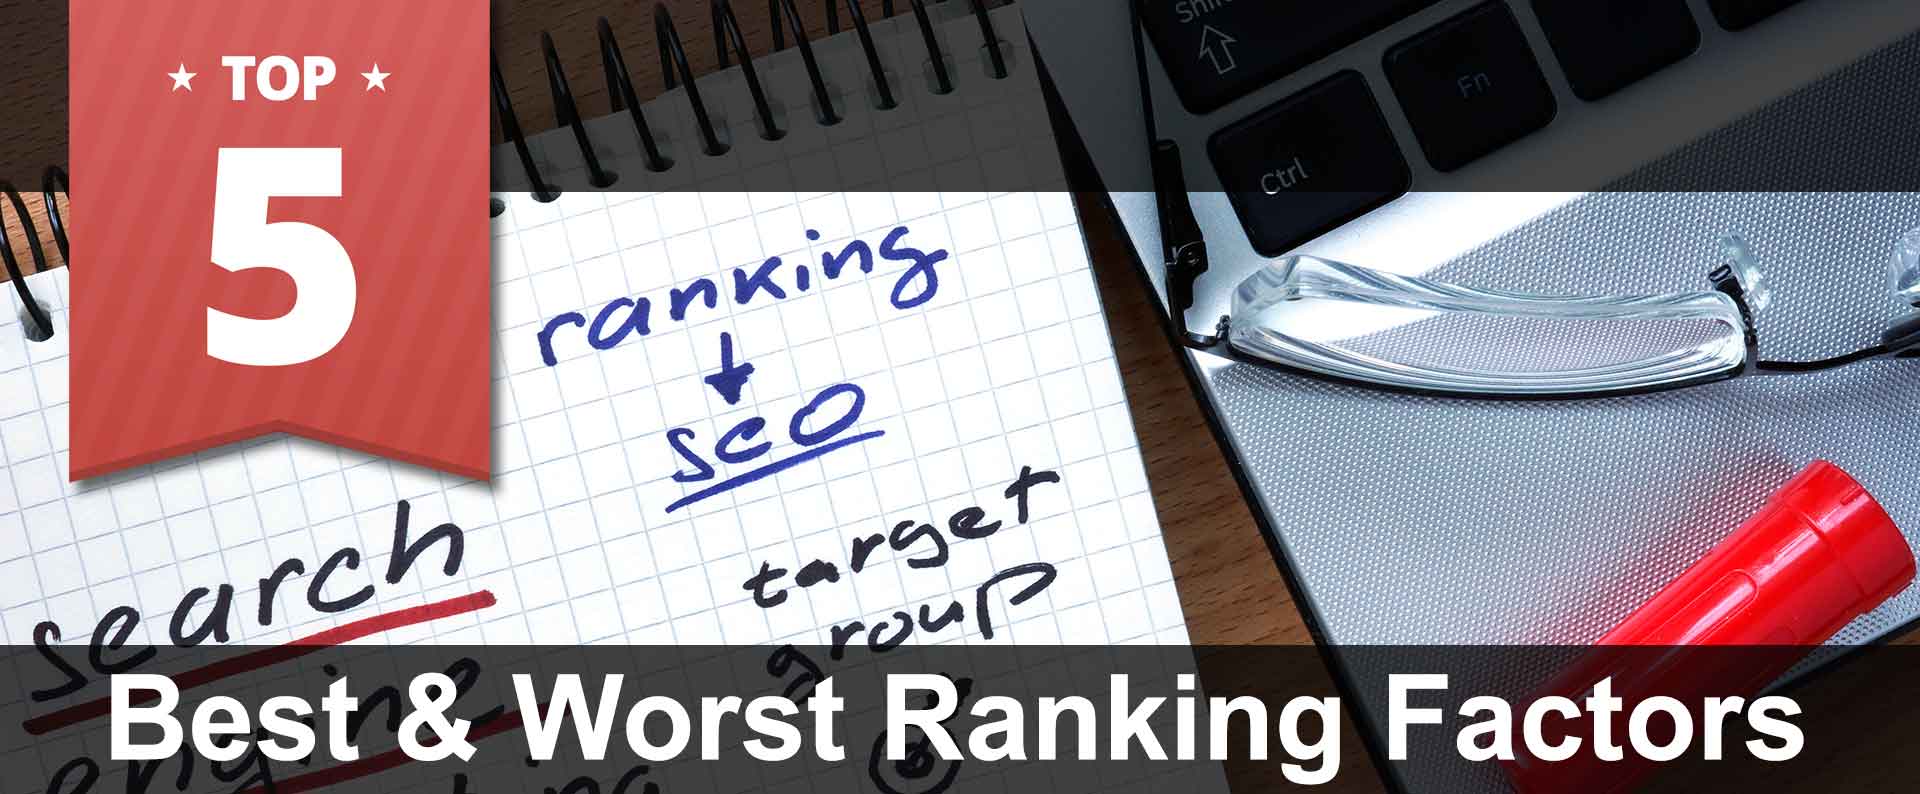 Expert Consensus on What Helps & What Hurts SEO